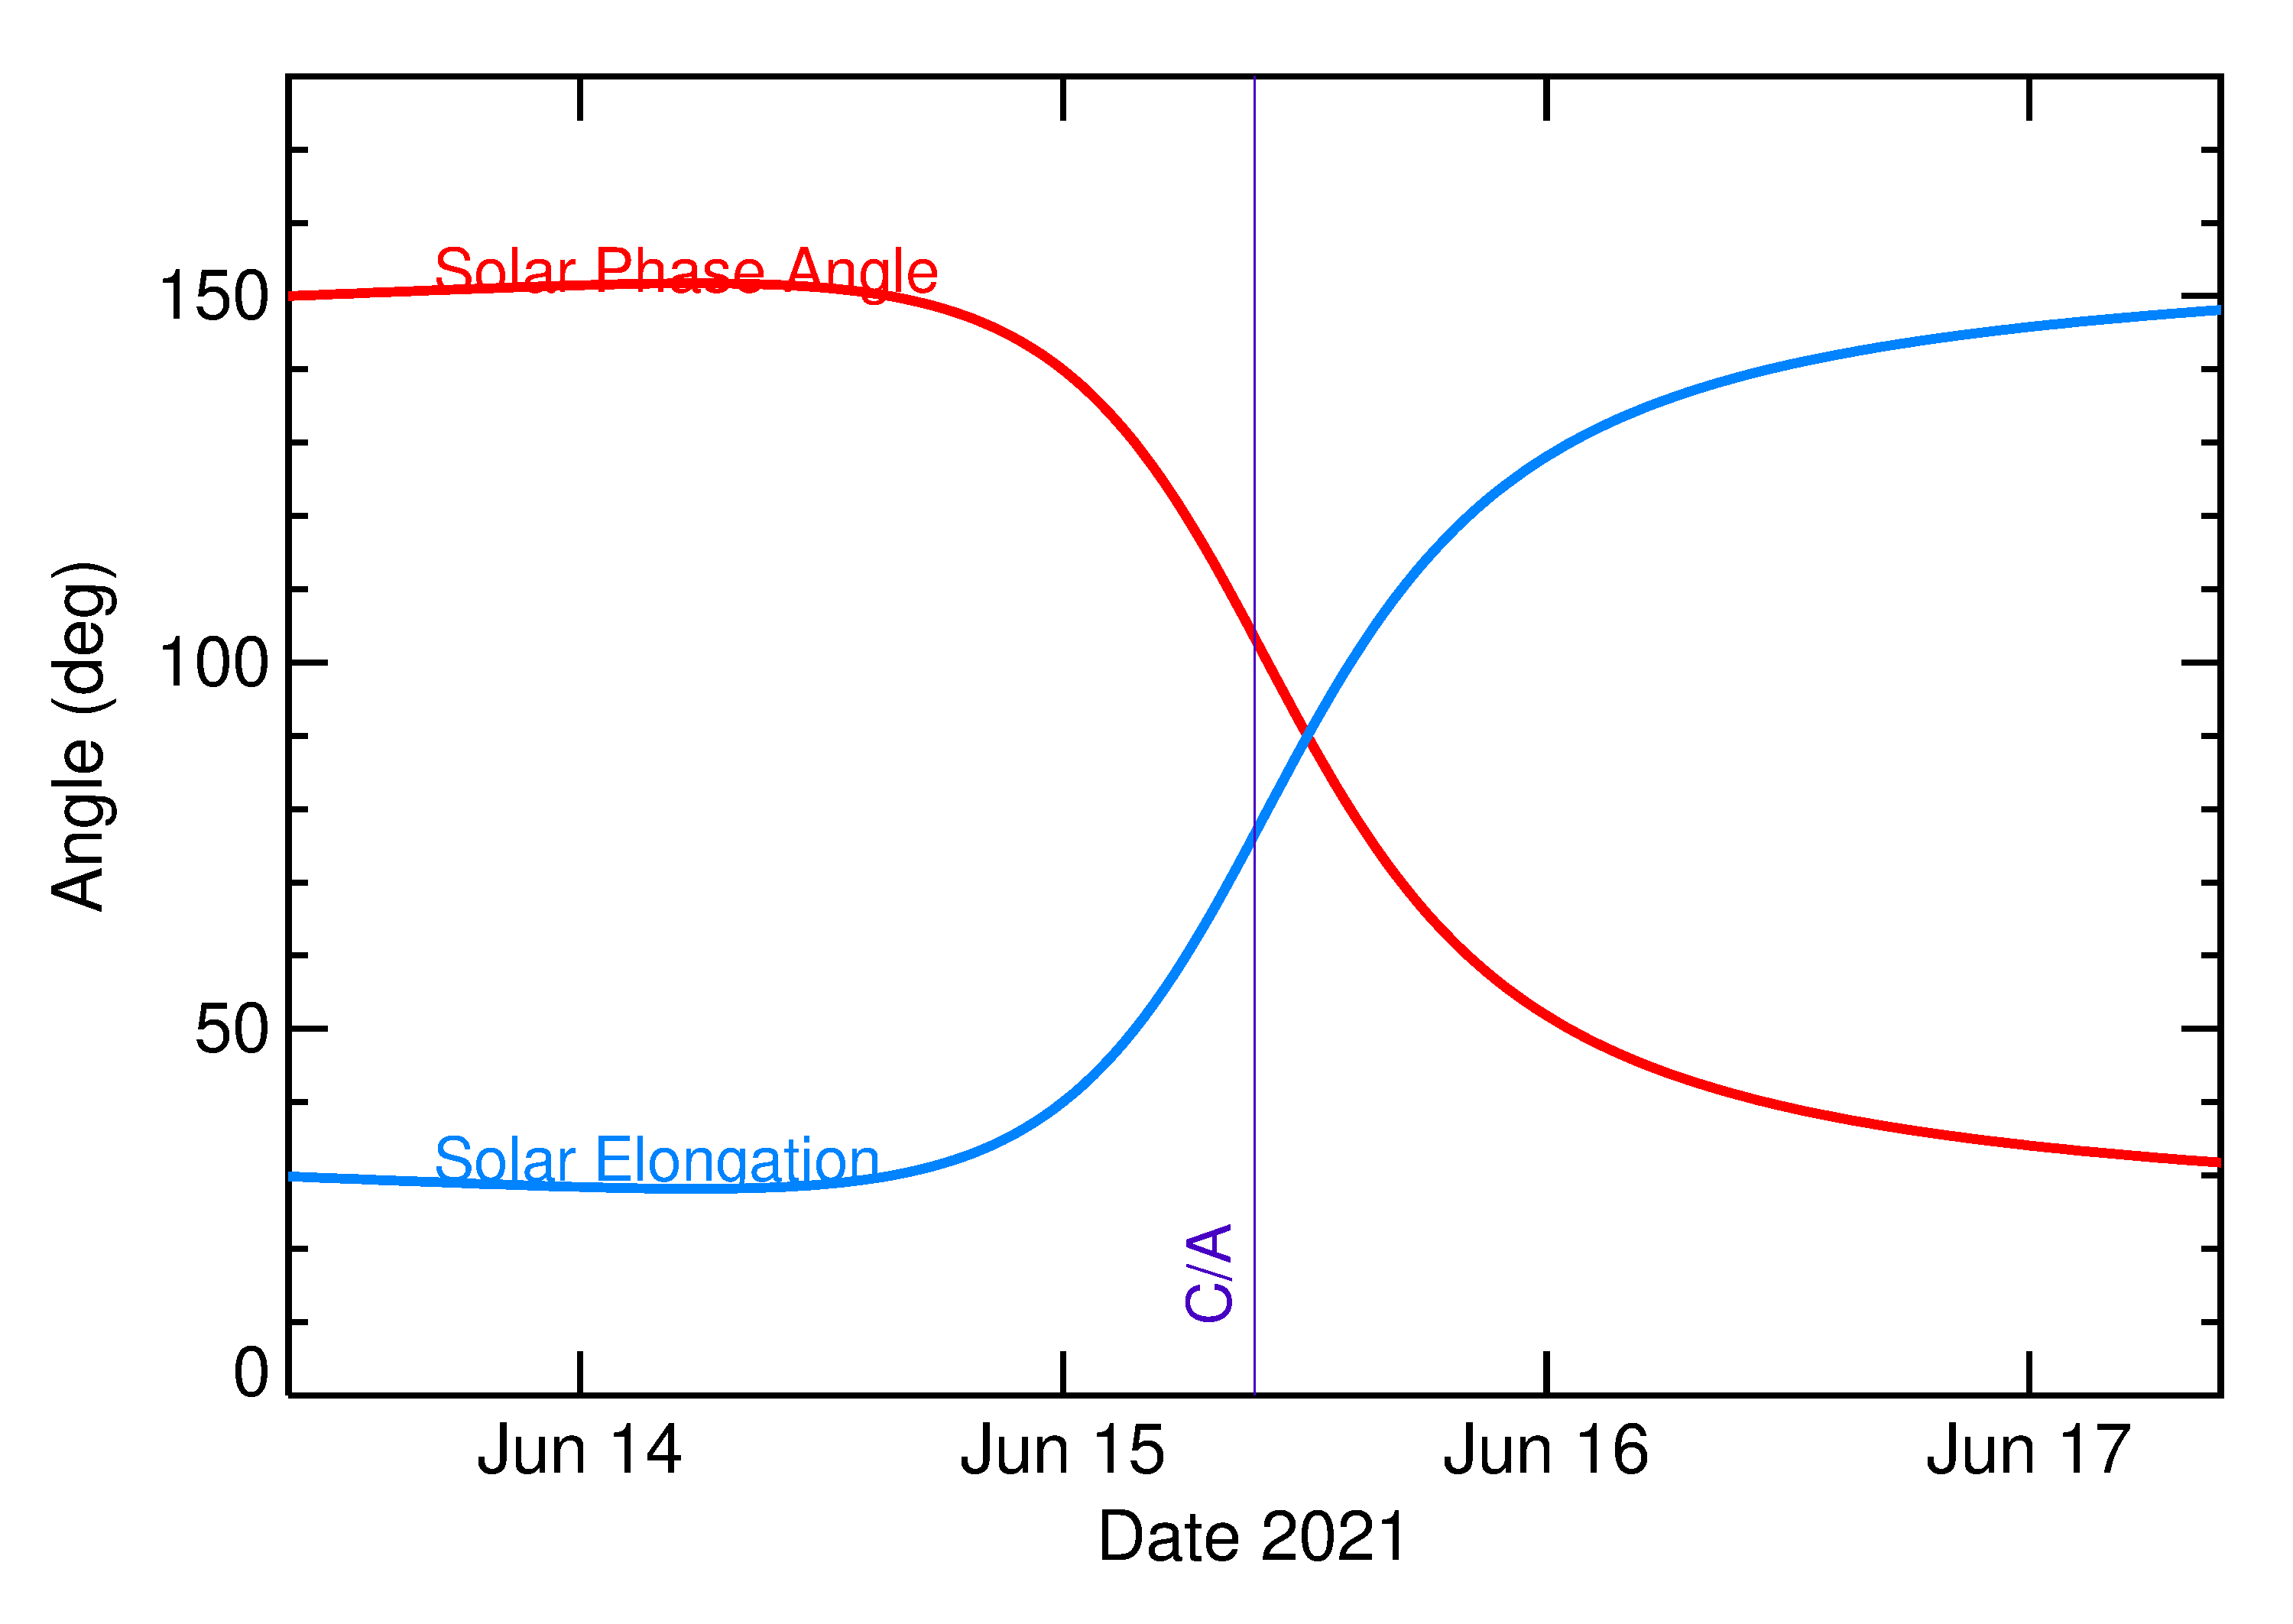 Solar Elongation and Solar Phase Angle of 2021 MU in the days around closest approach